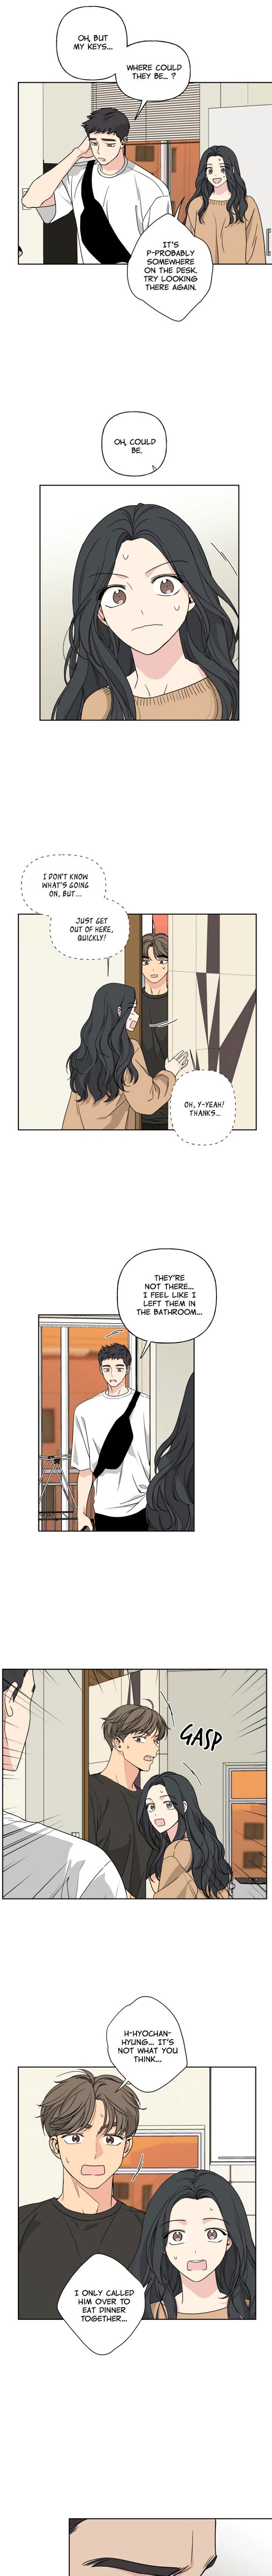 mother-im-sorry-chap-27-7